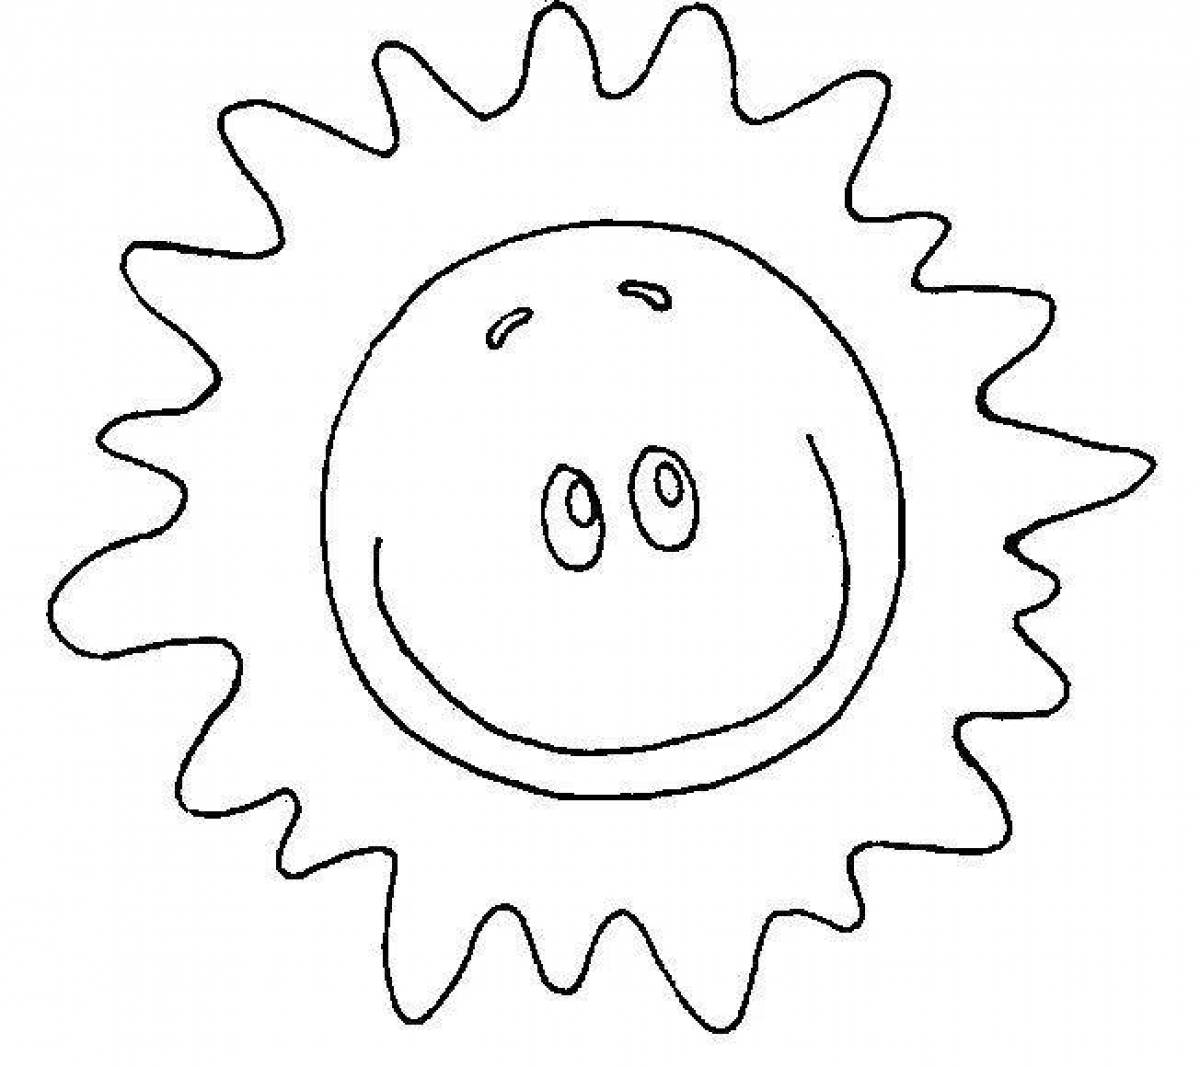 Great sun coloring book for 2-3 year olds